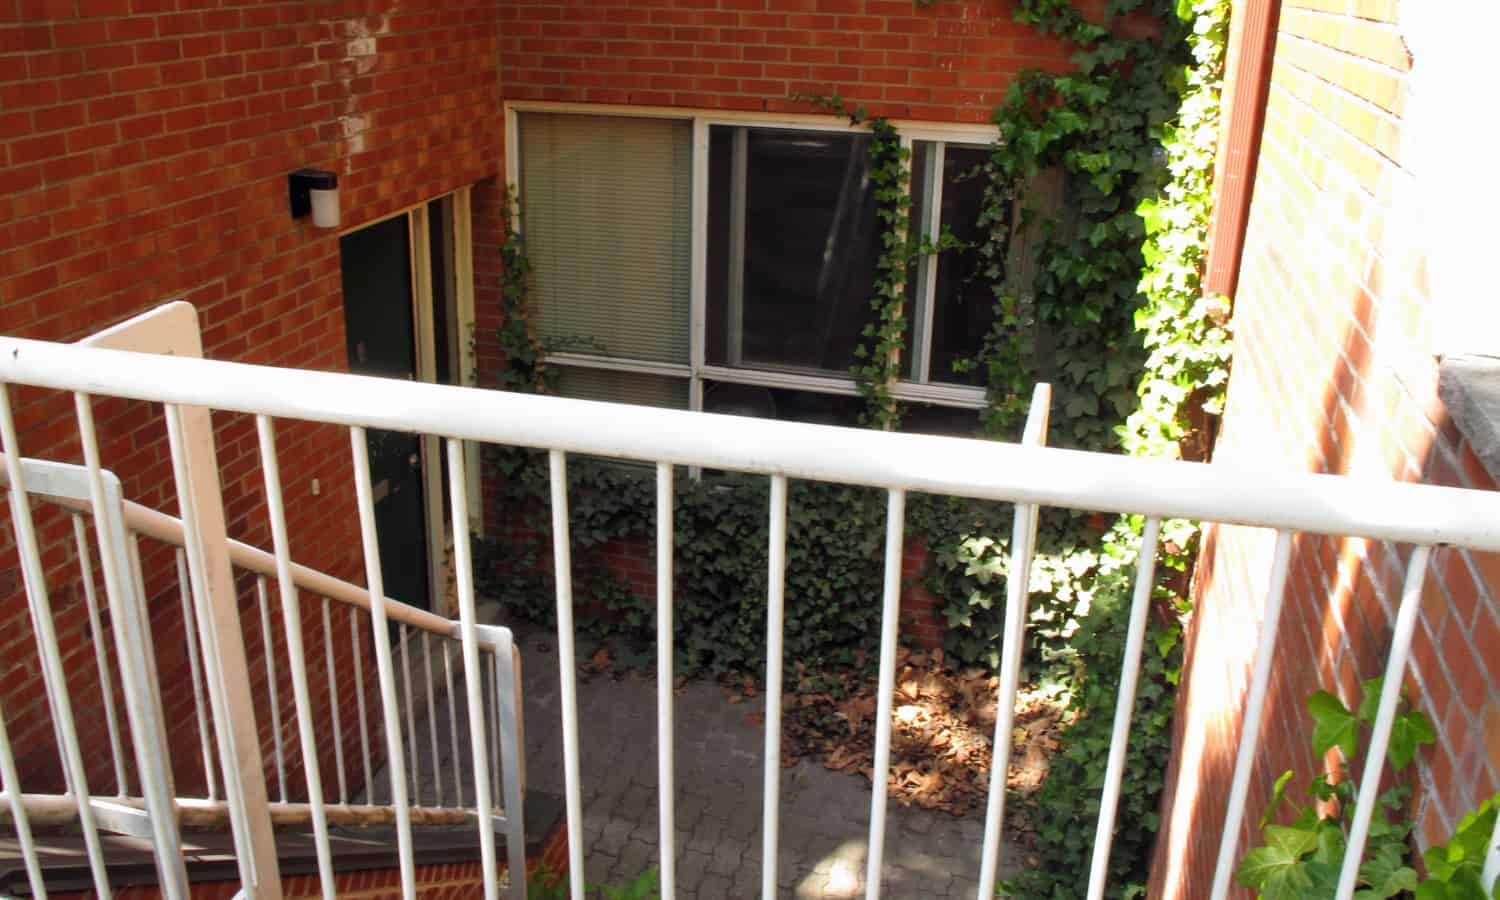 Sunken entry and small courtyard along Henry Street